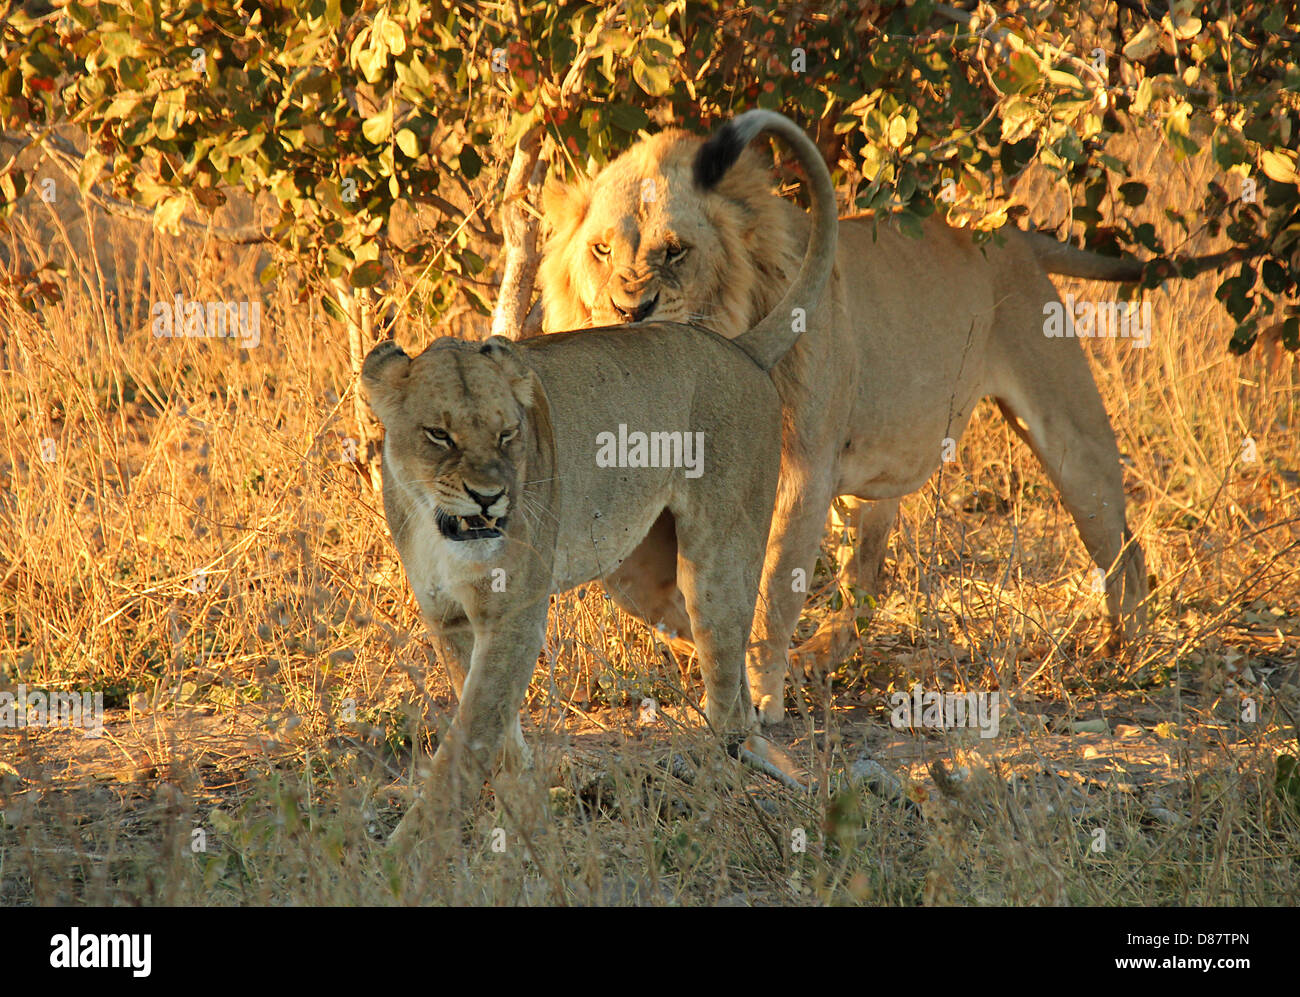 Lion Couple with Angry Look, Khwai River, Botswana Stock Photo